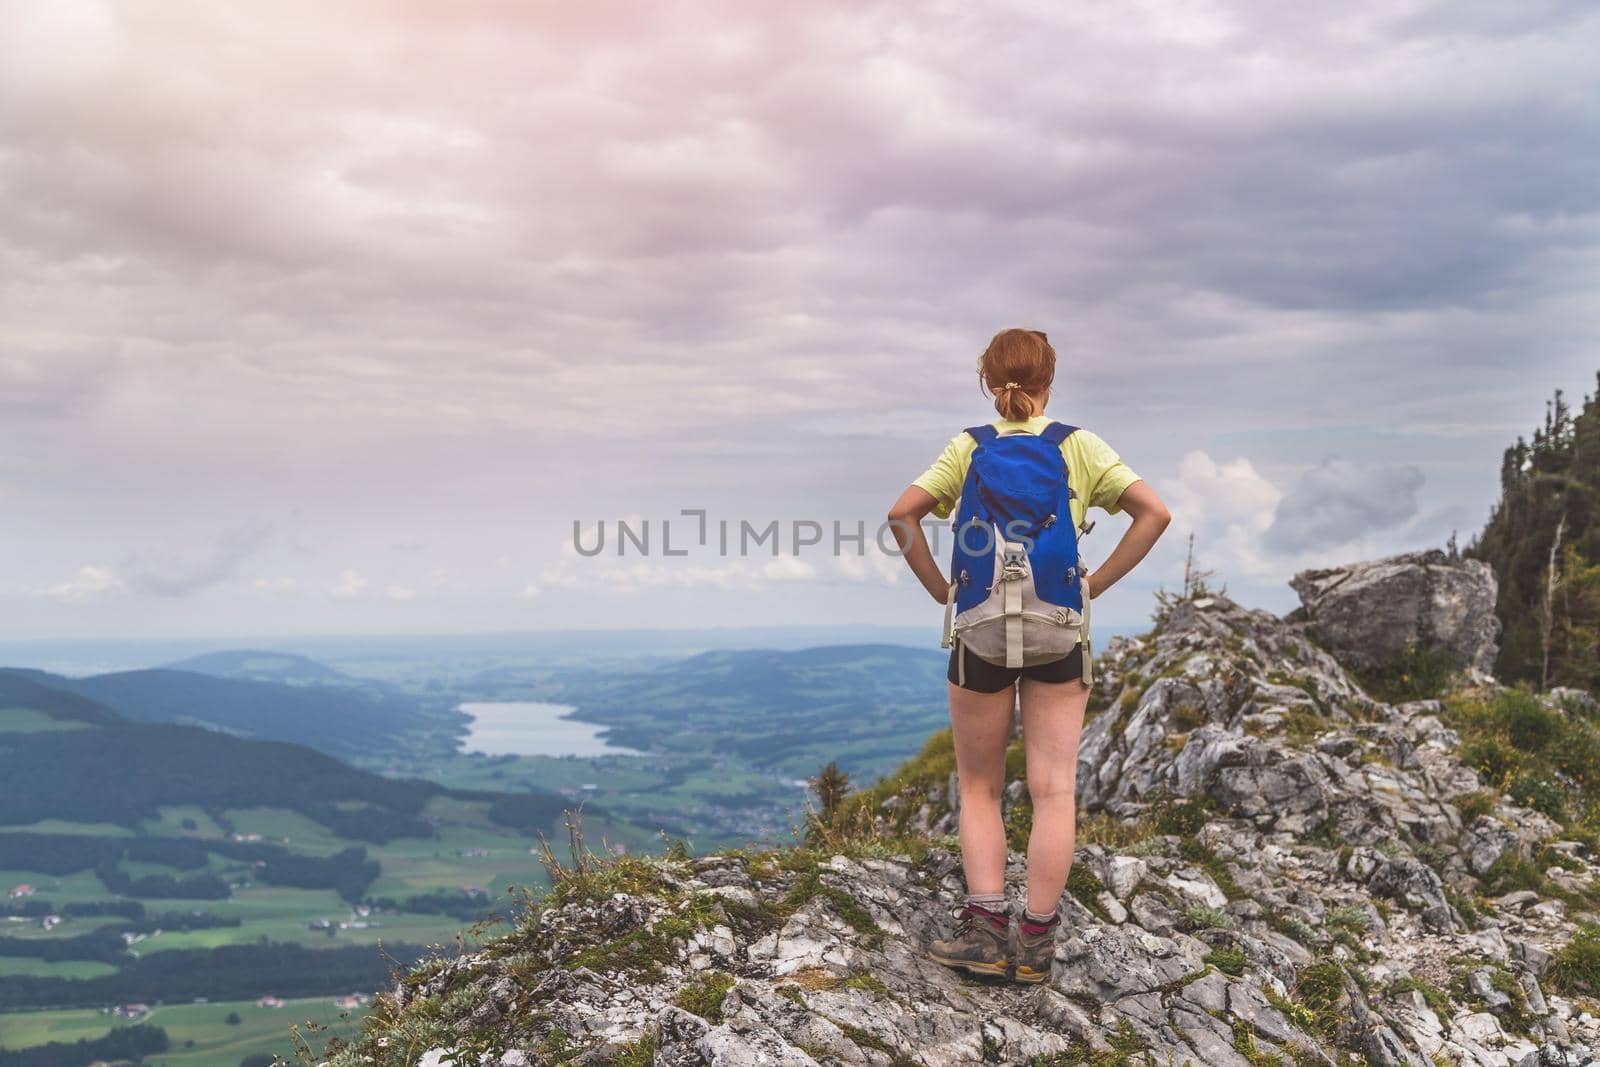 Adventure in the mountains. Young tourist girl on the top of a rocky mountain in Austria by Daxenbichler